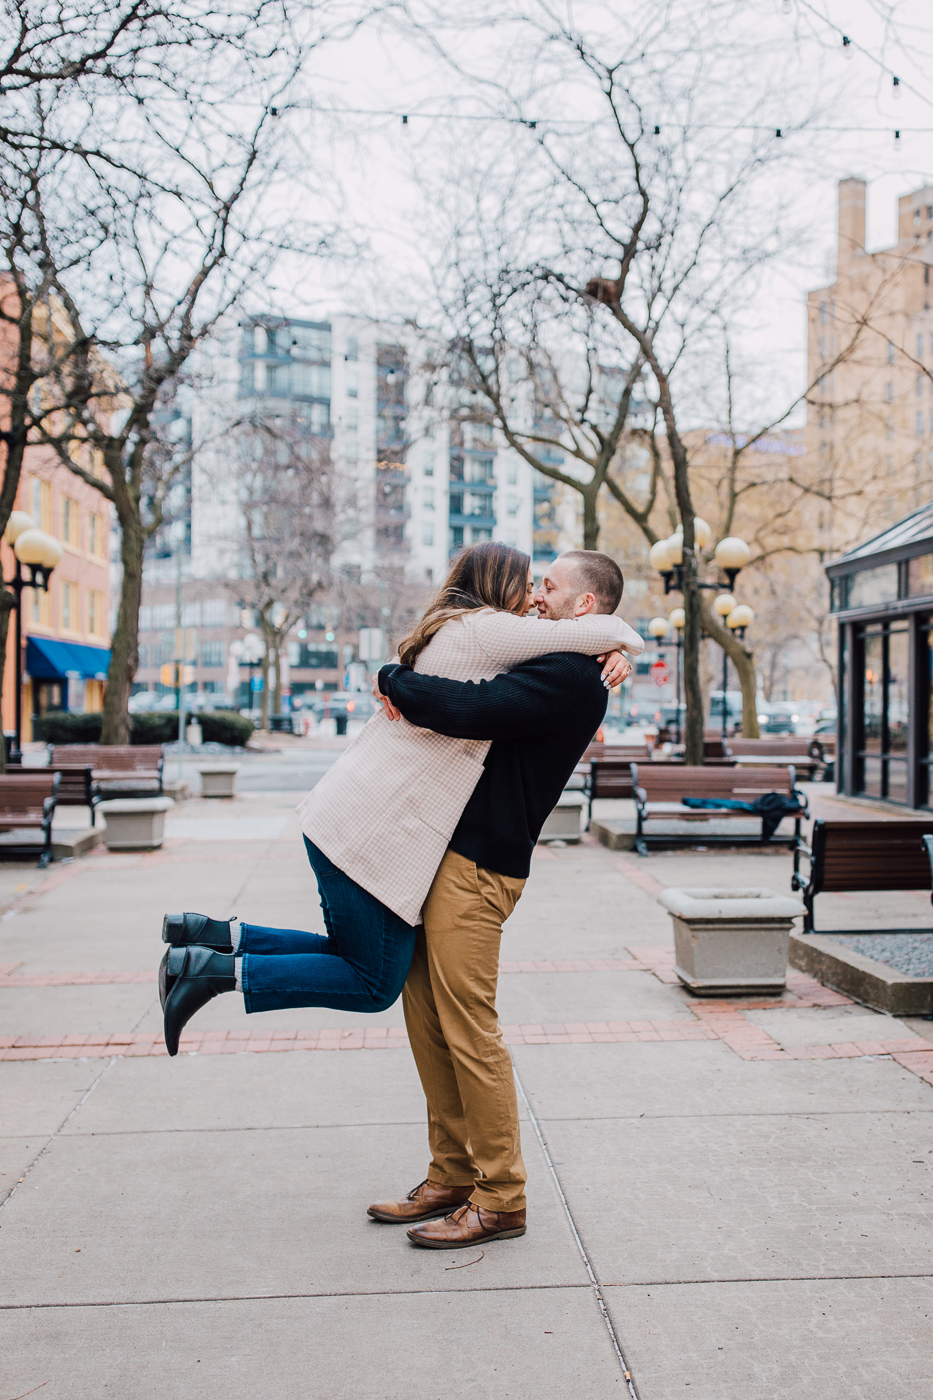  Man lifts and kisses his fiance during a winter photo shoot in downtown Syracuse 